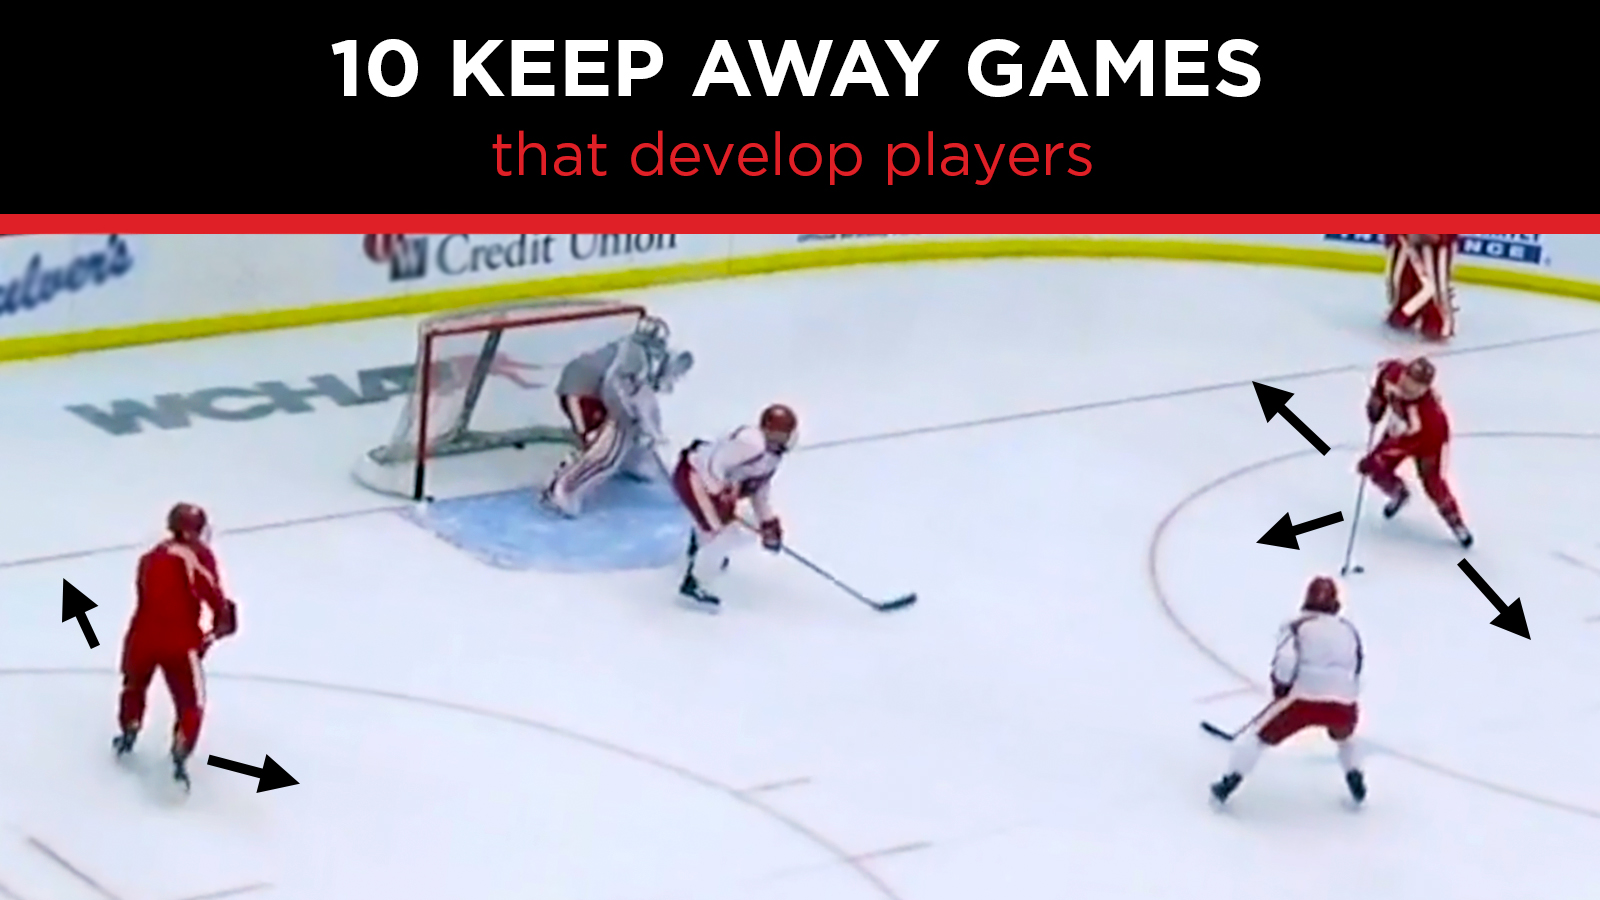 10 keep away games that develop hockey players